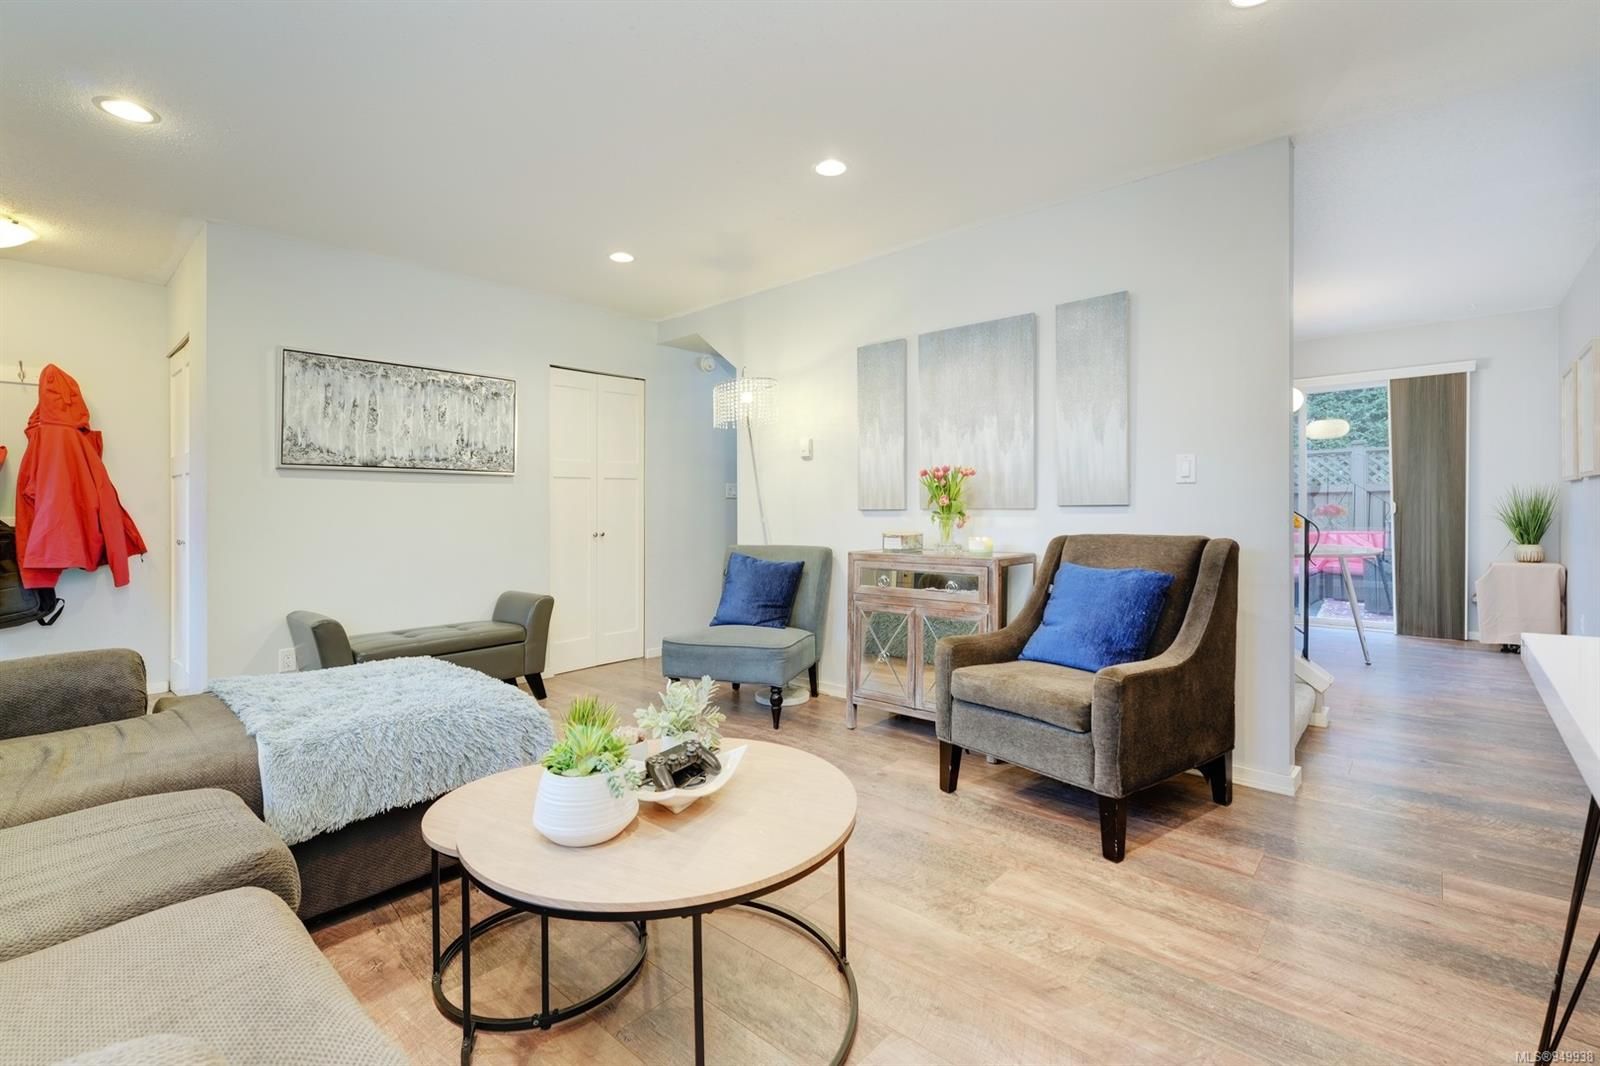 Open House. Open House on Sunday, February 25, 2024 2:00PM - 3:30PM
Step into this lovely 2-bedroom, 2-bath townhome situated in a prime location, walking distance to Swan Lake, scenic Galloping Goose Trail, and convenient bus routes connecting to downtow